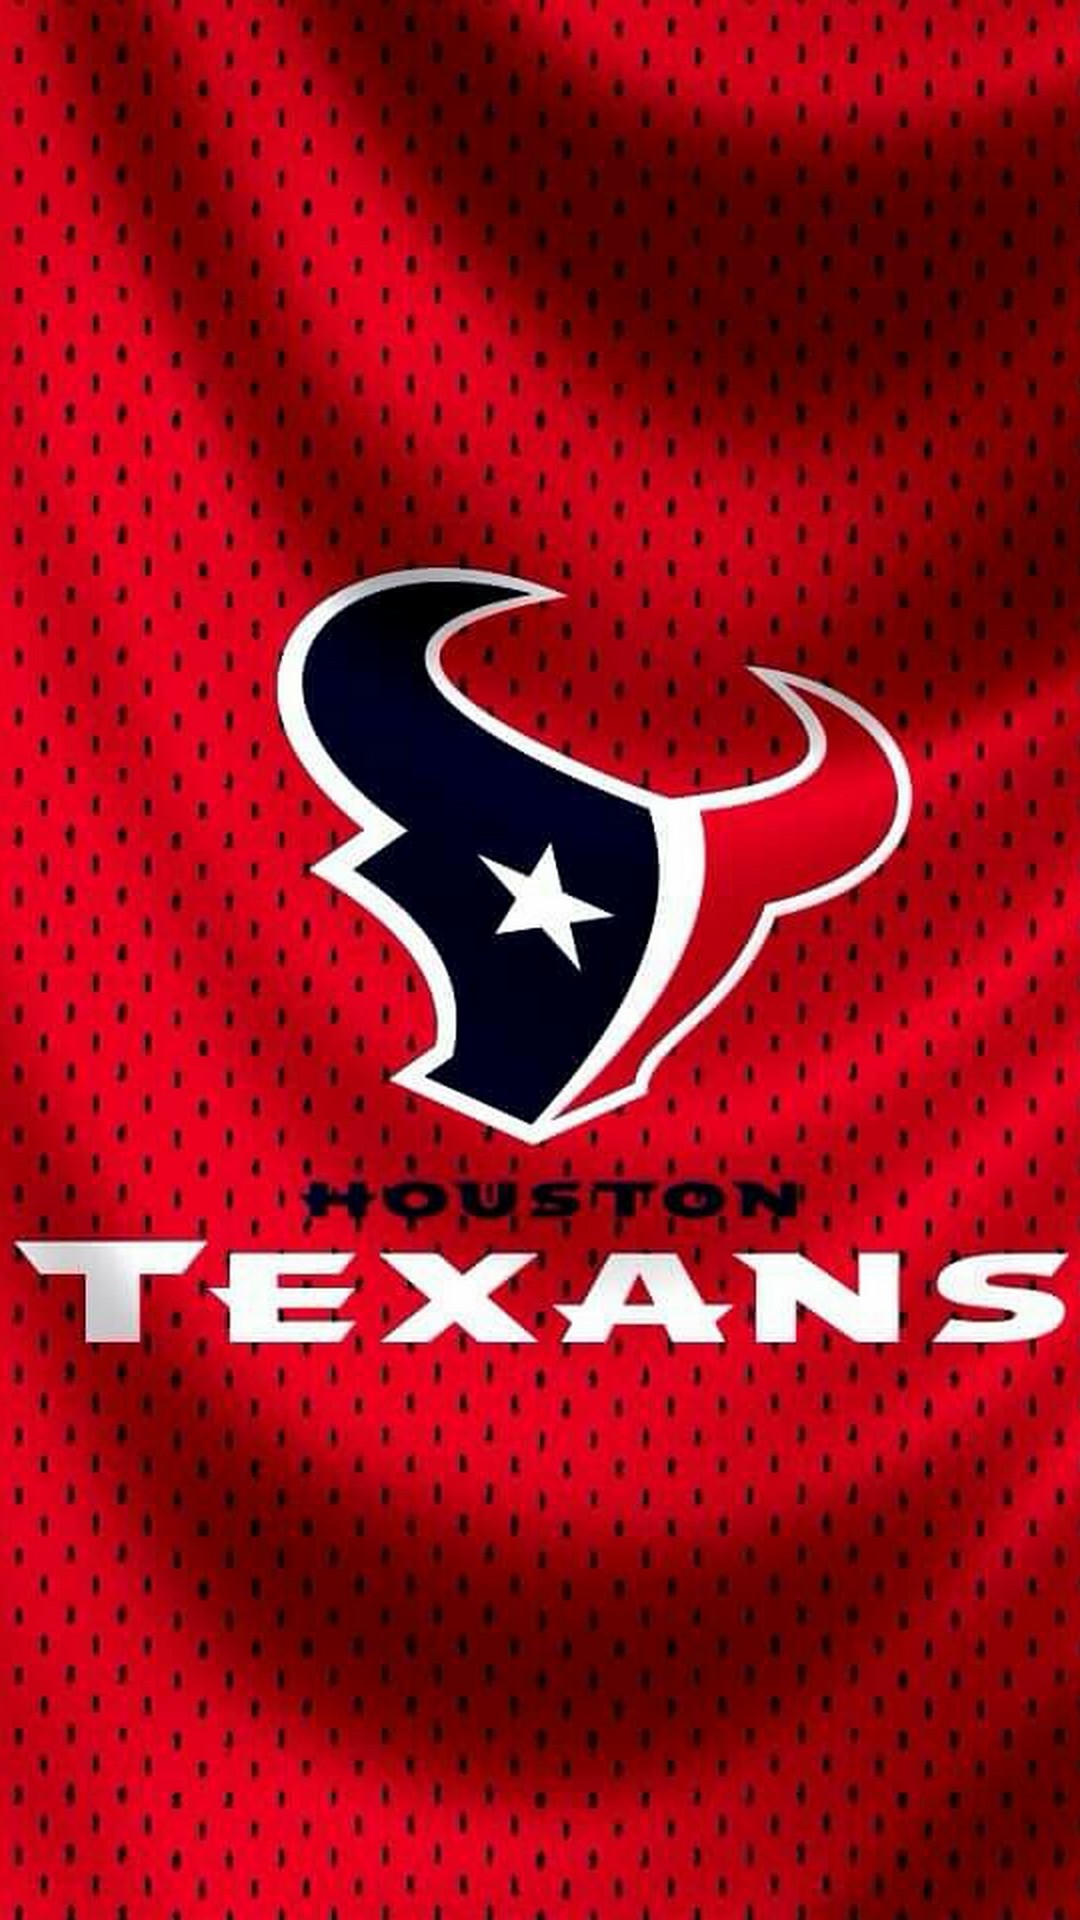 Houston Texans iPhone 6 Plus Wallpaper with high-resolution 1080x1920 pixel. Download and set as wallpaper for Apple iPhone X, XS Max, XR, 8, 7, 6, SE, iPad, Android